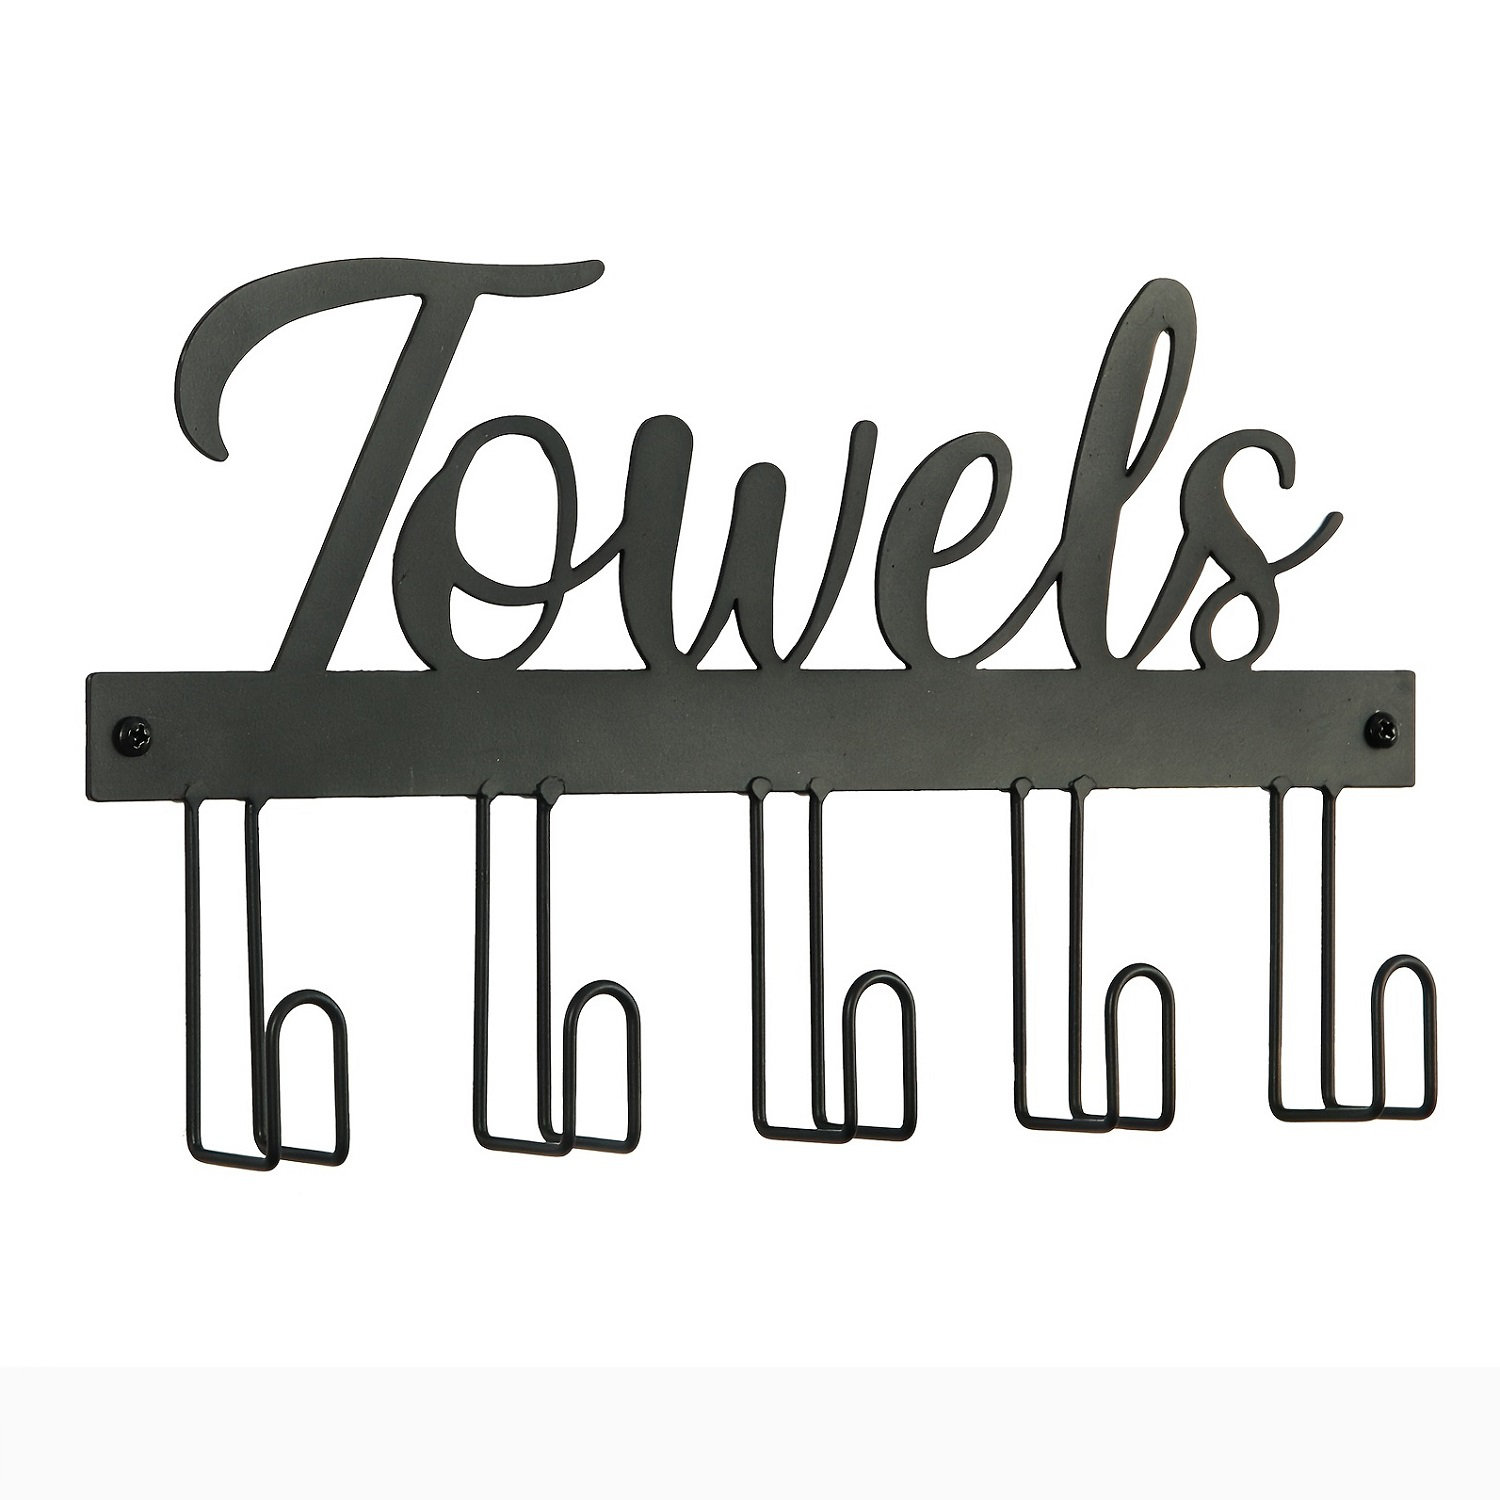 BTY LT-BFE190-DO 17.13 Wall Mounted Towel Bar